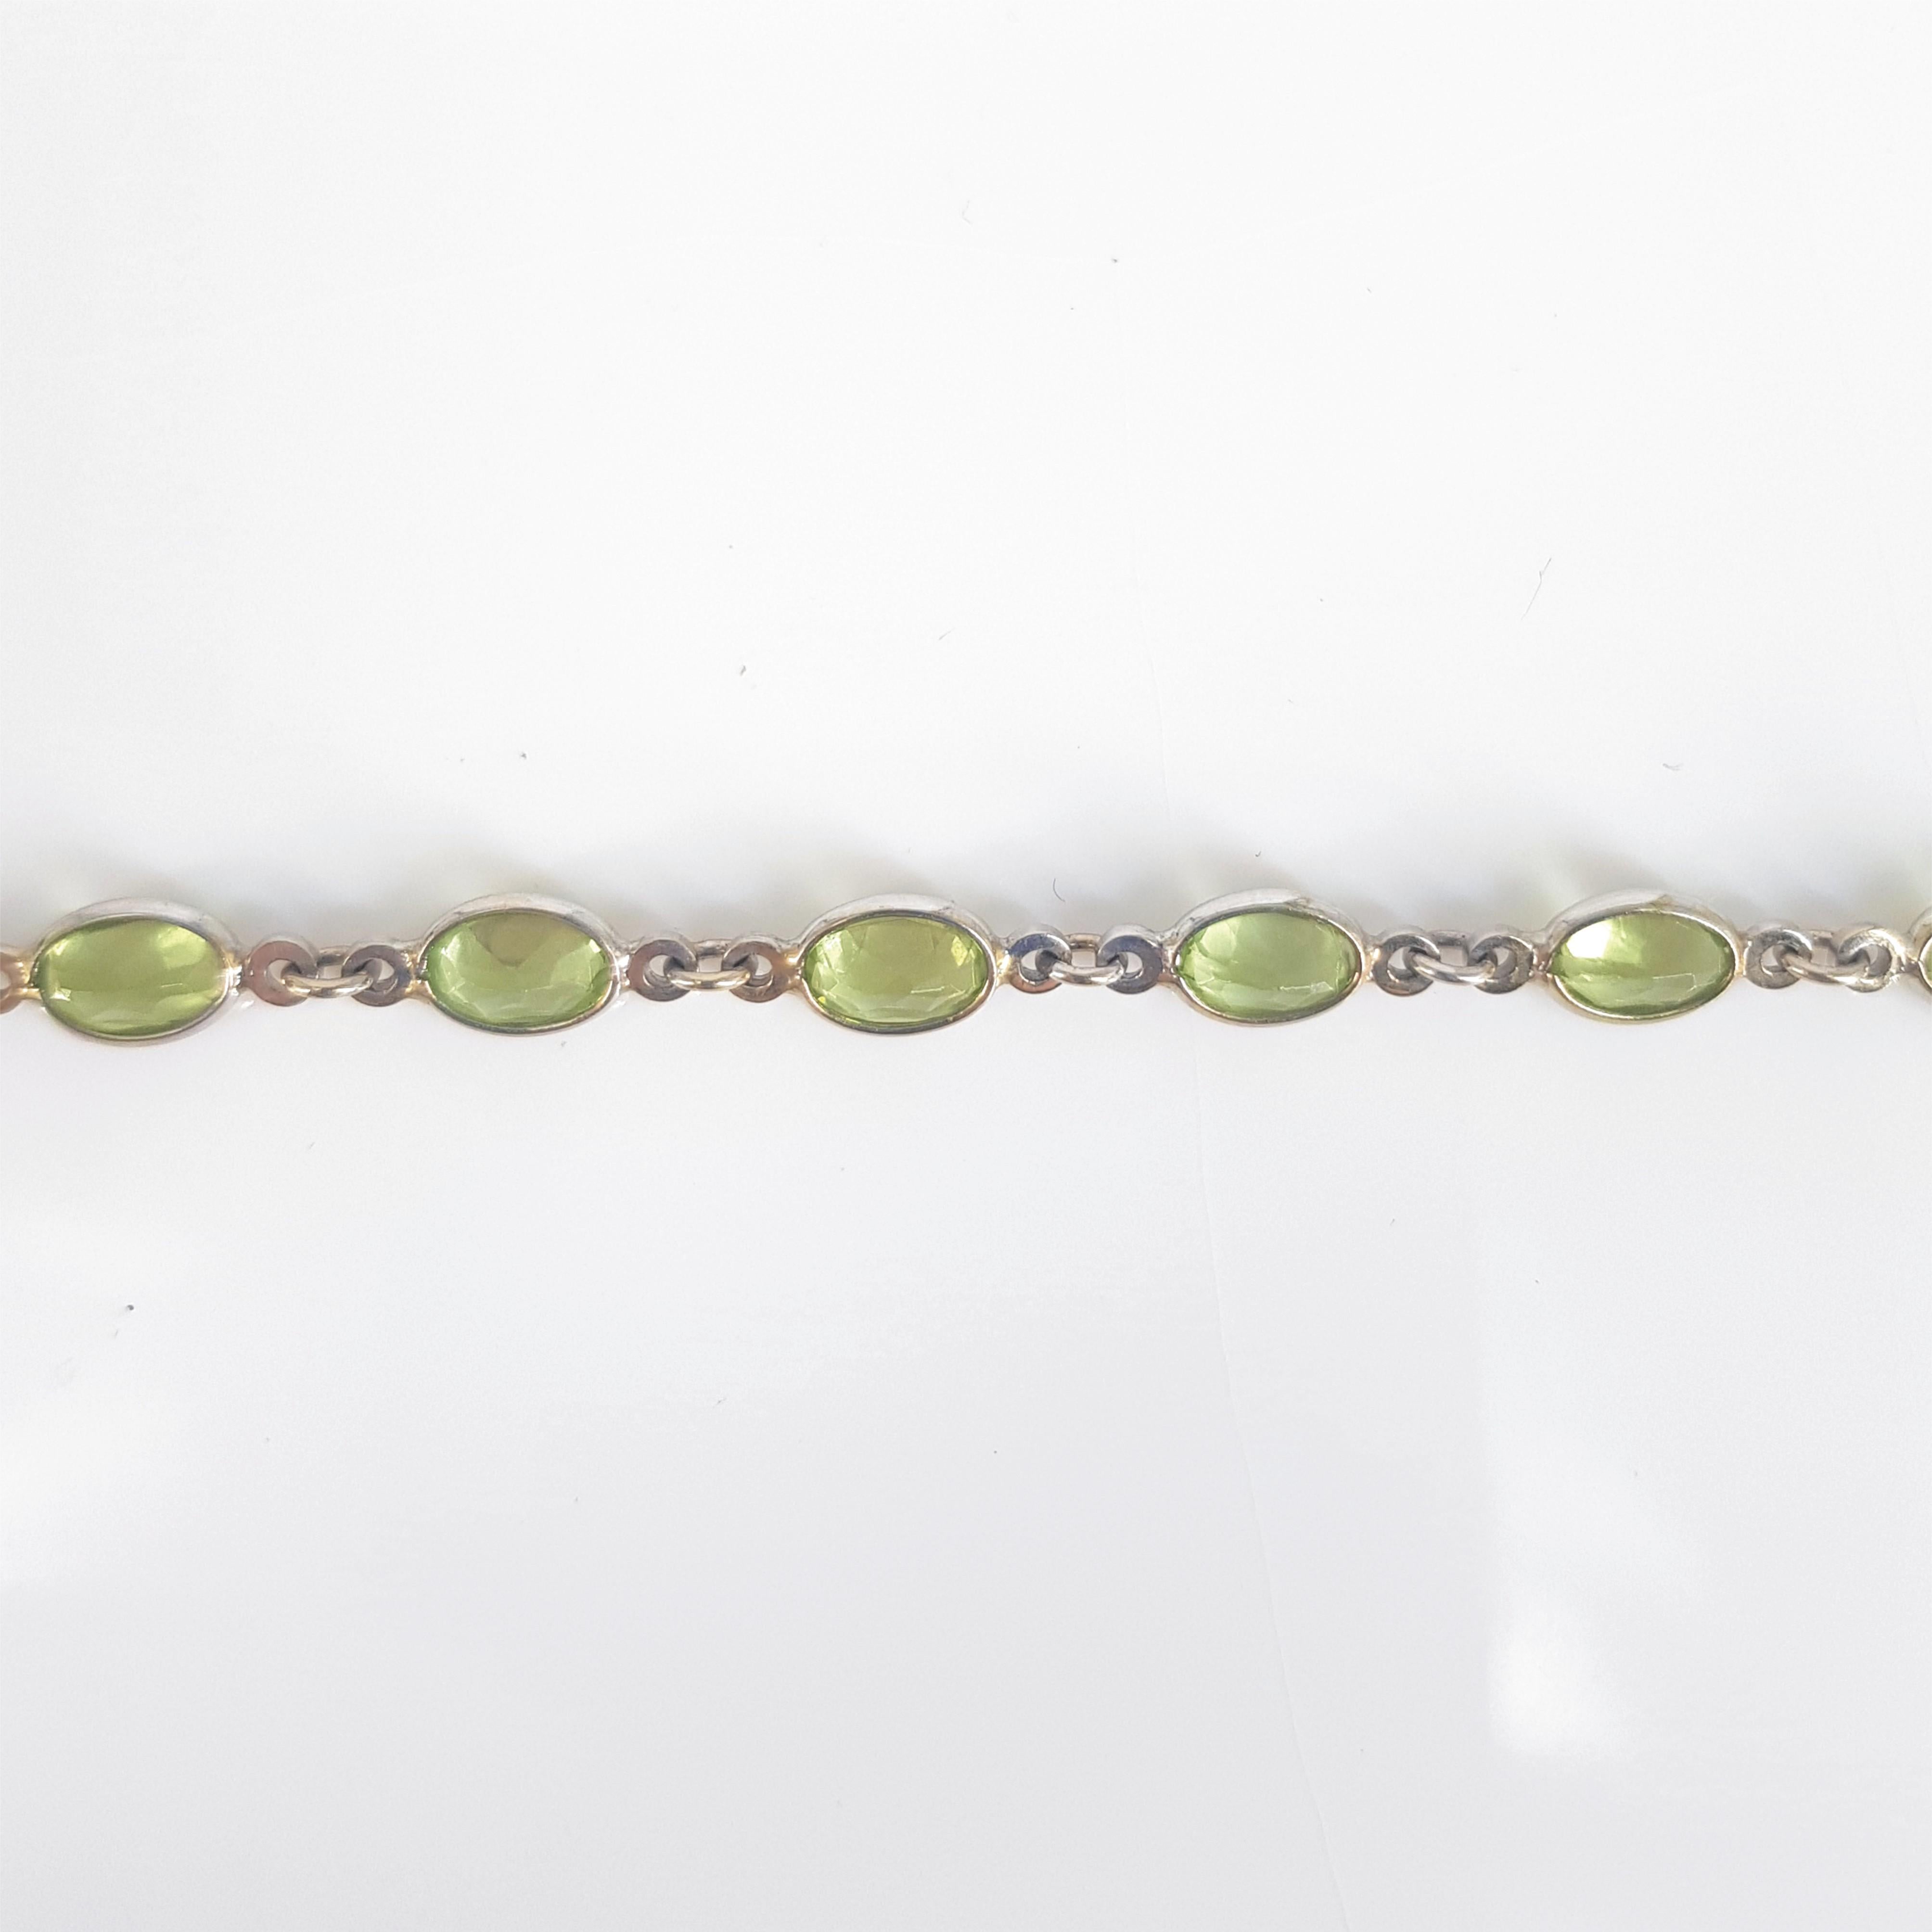 18 Ct White Gold Peridot Necklace In Good Condition For Sale In Cape Town, ZA